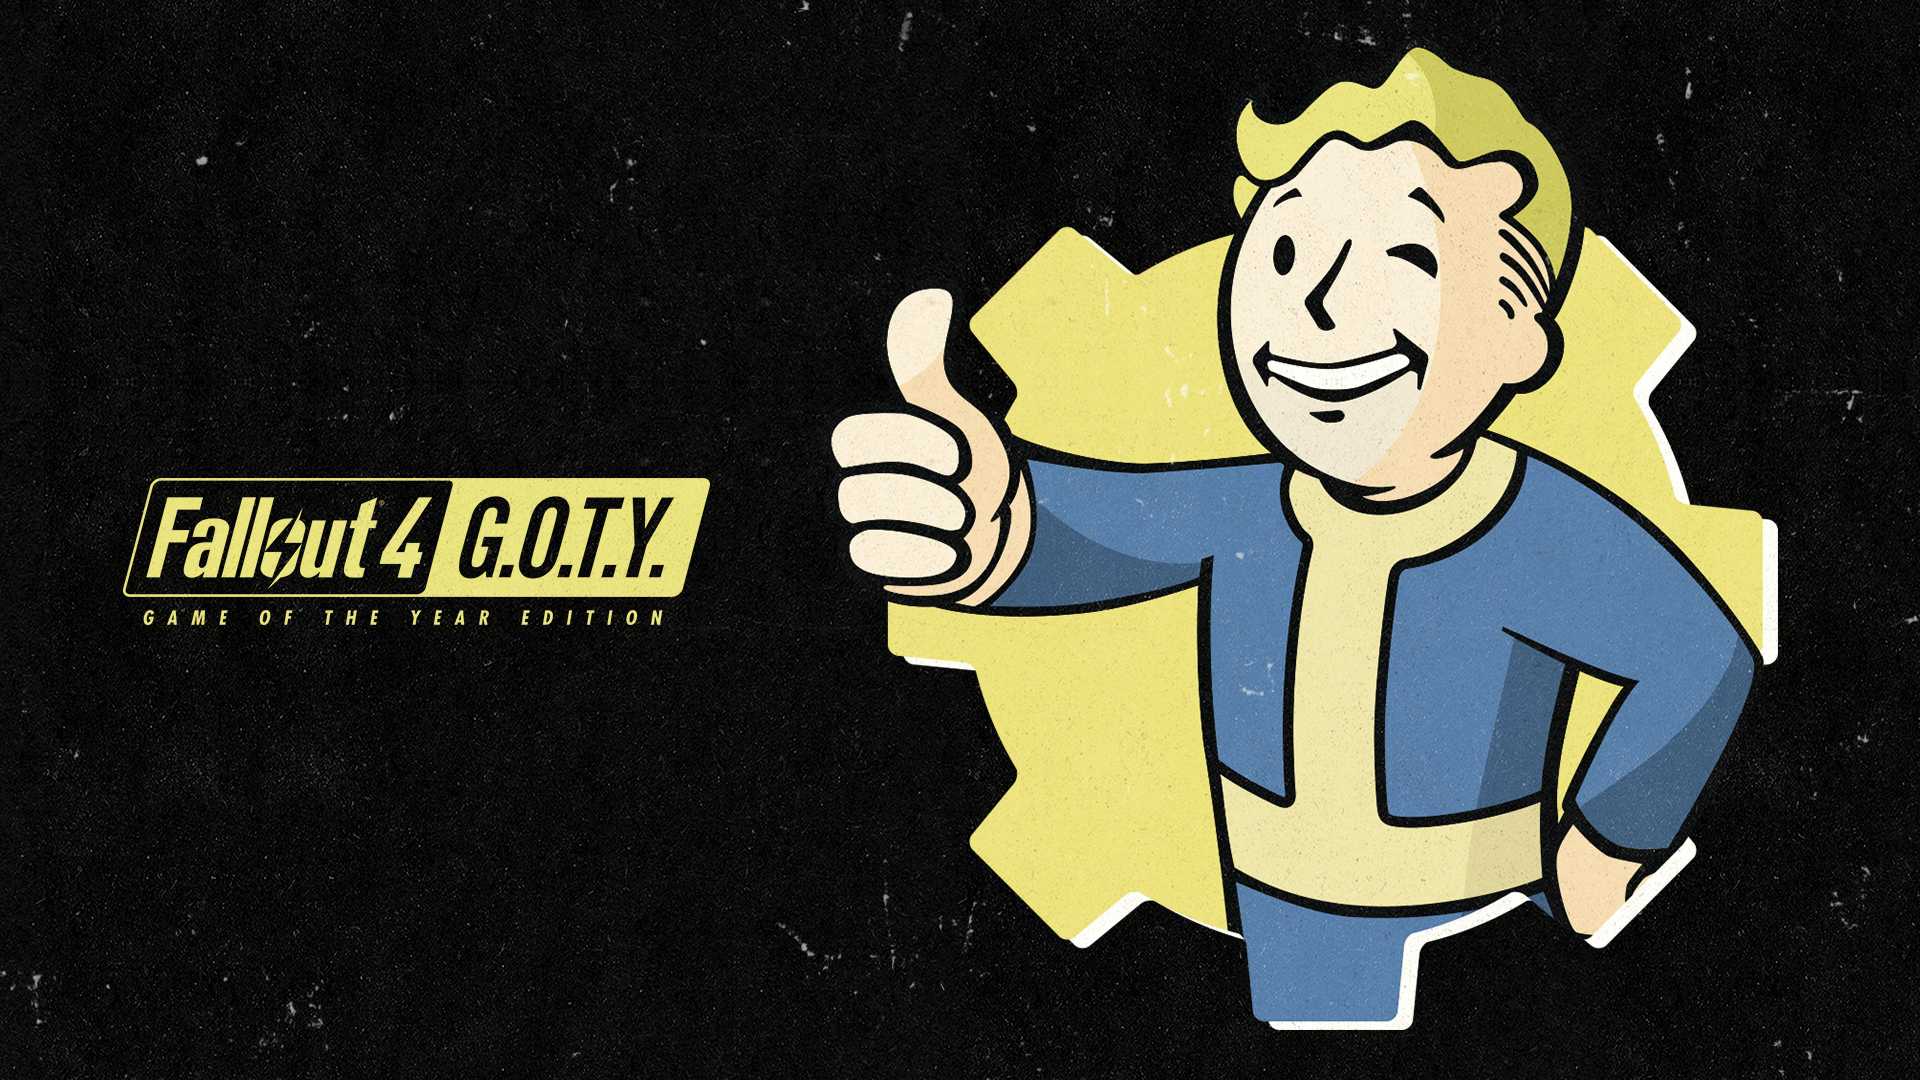  Fallout 4: Game of the Year Edition